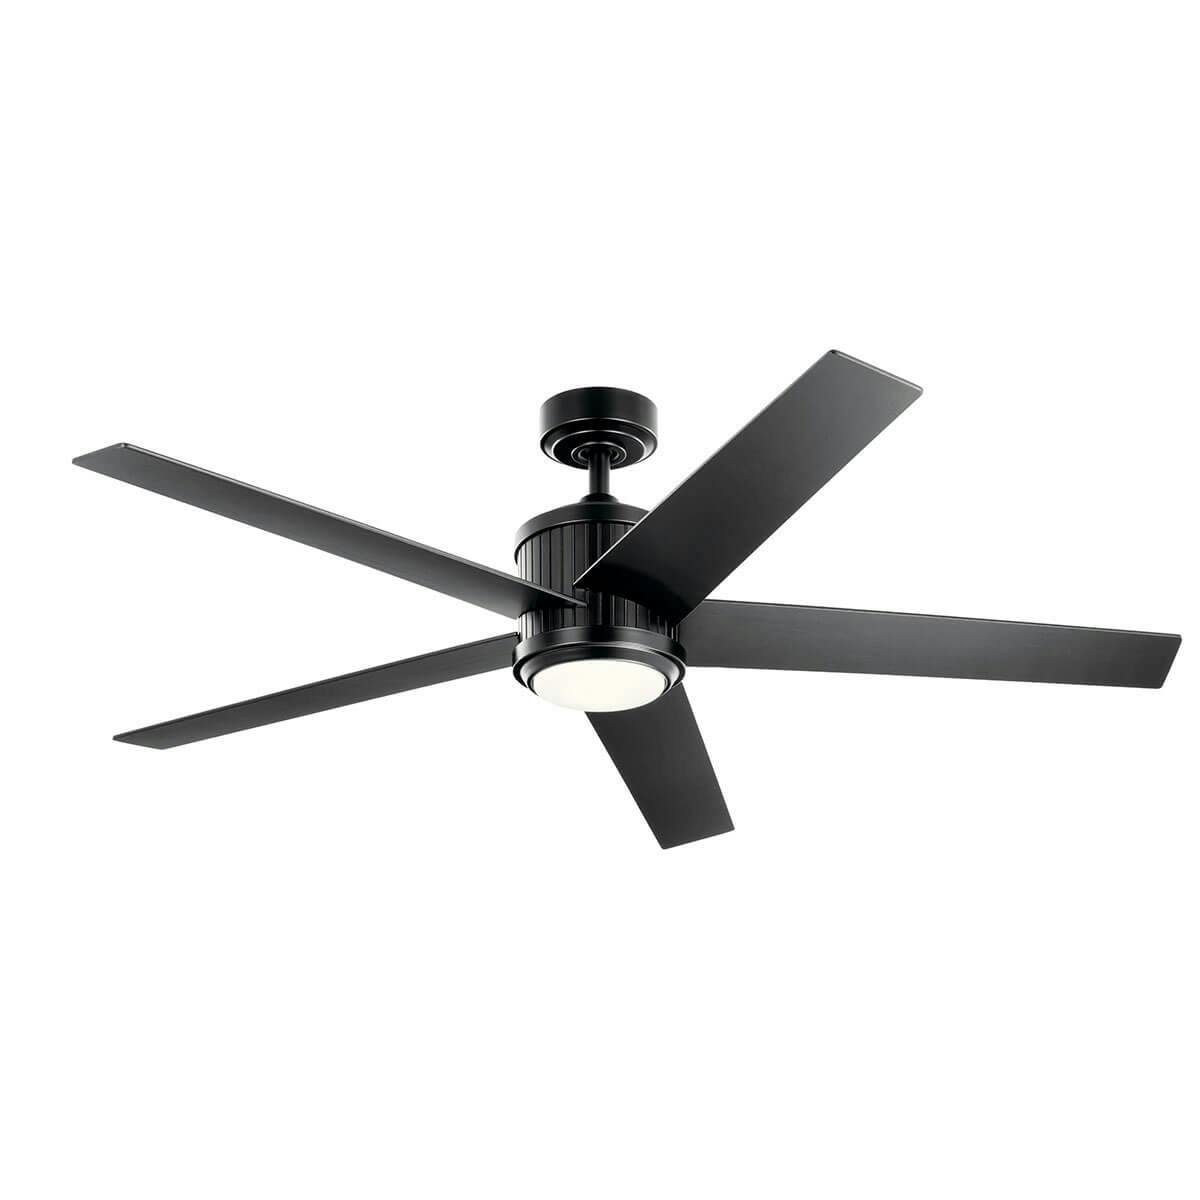 56” Brahm LED Ceiling Fan in Satin Black  on a white background